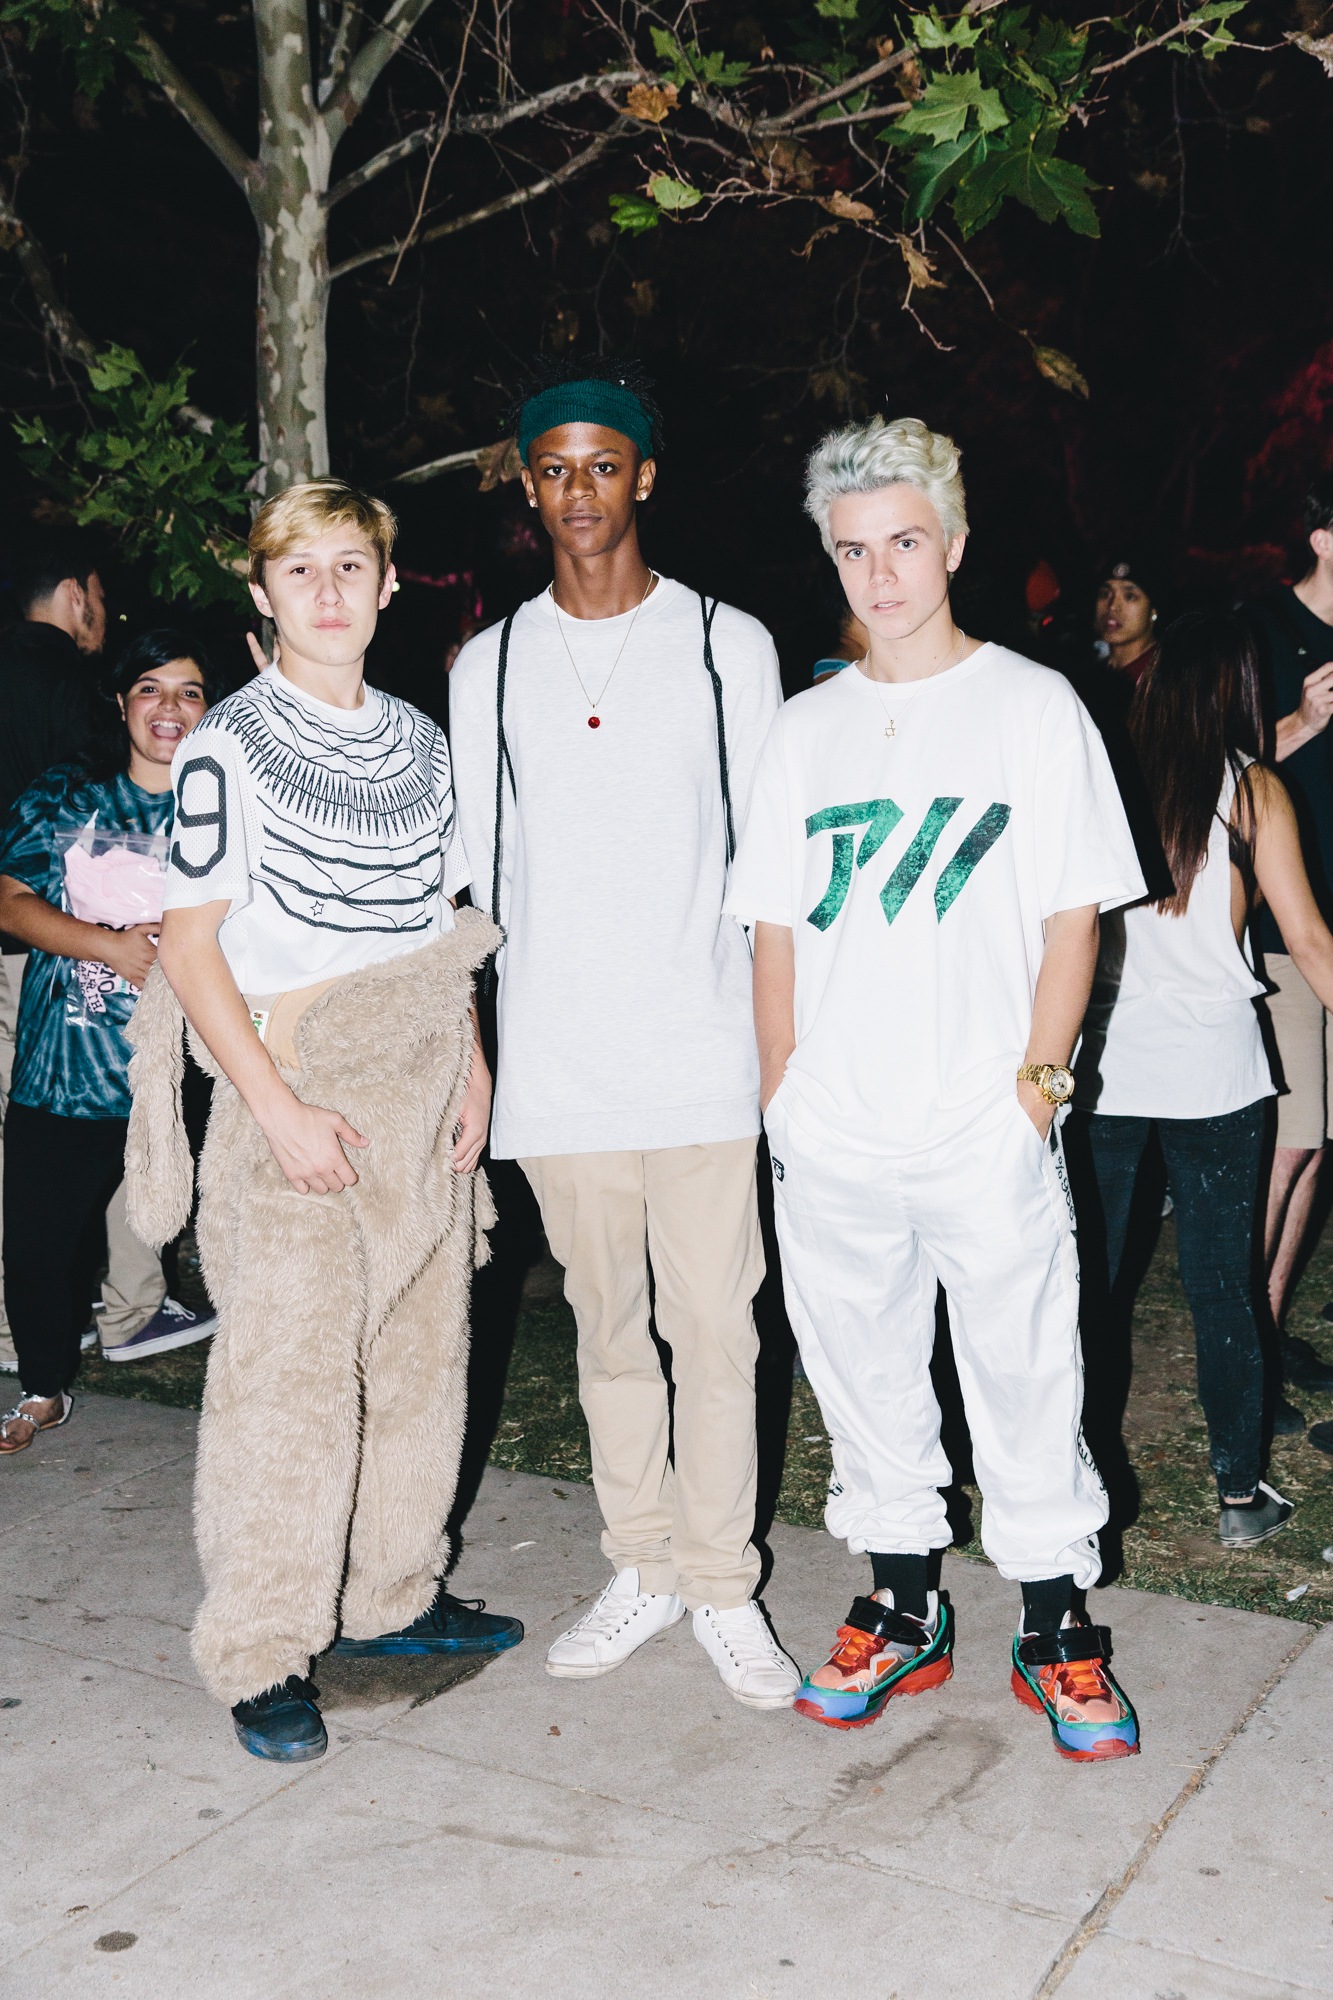 29 Pictures That Perfectly Encapsulate Camp Flog Gnaw’s Insane Style